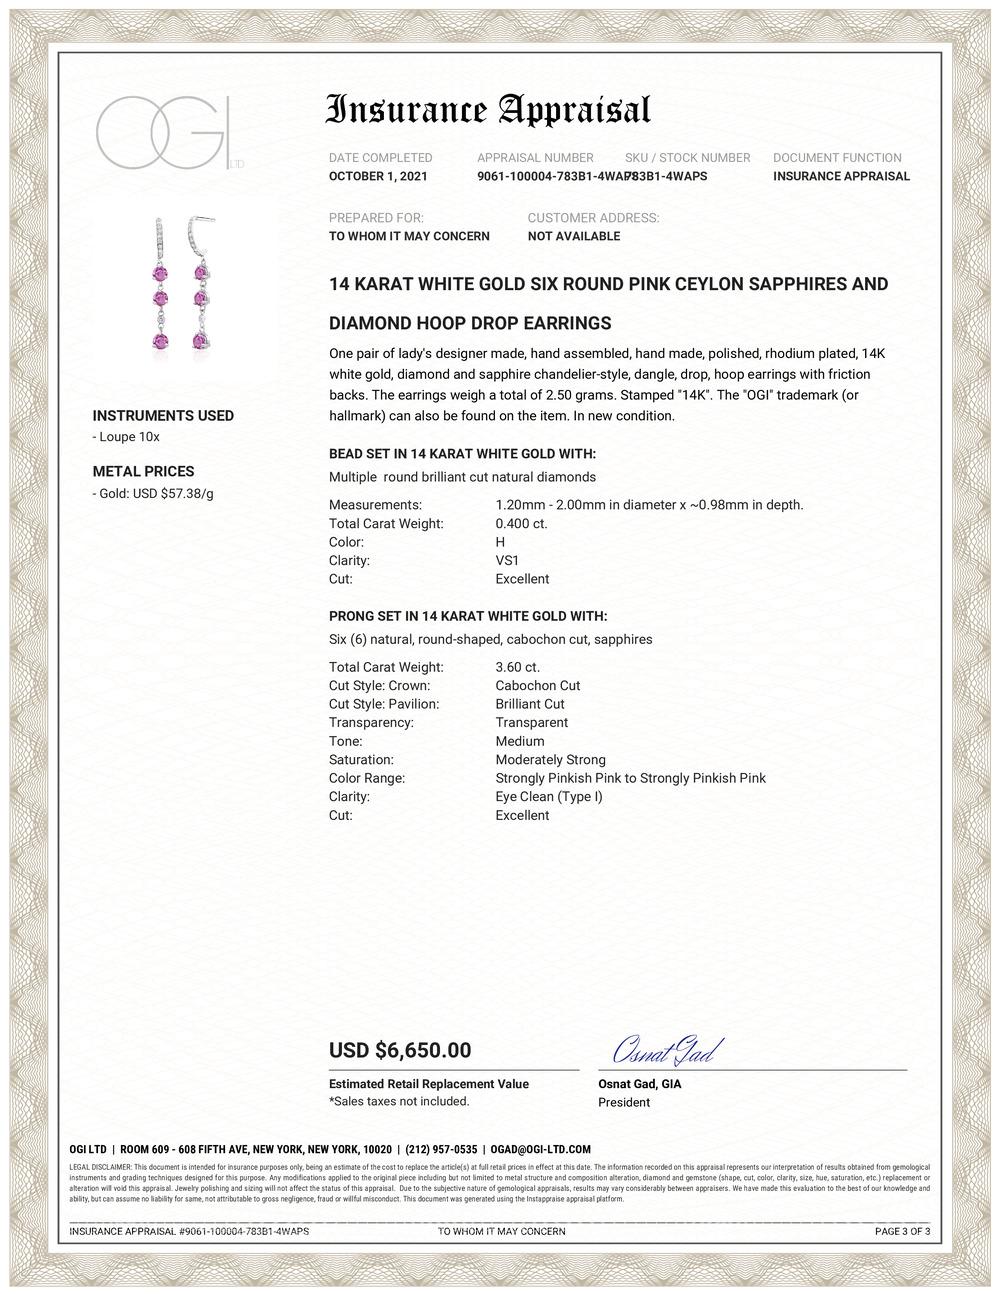 Fourteen karat white gold diamond and pink sapphire hoop earrings one inch long
Four vibrant, vivid and brilliant pink sapphire weighing 3.60 carats 
Pink sapphire tone color is taffy pink
Diamonds weighing 0.40 carat
Pink sapphires are measuring